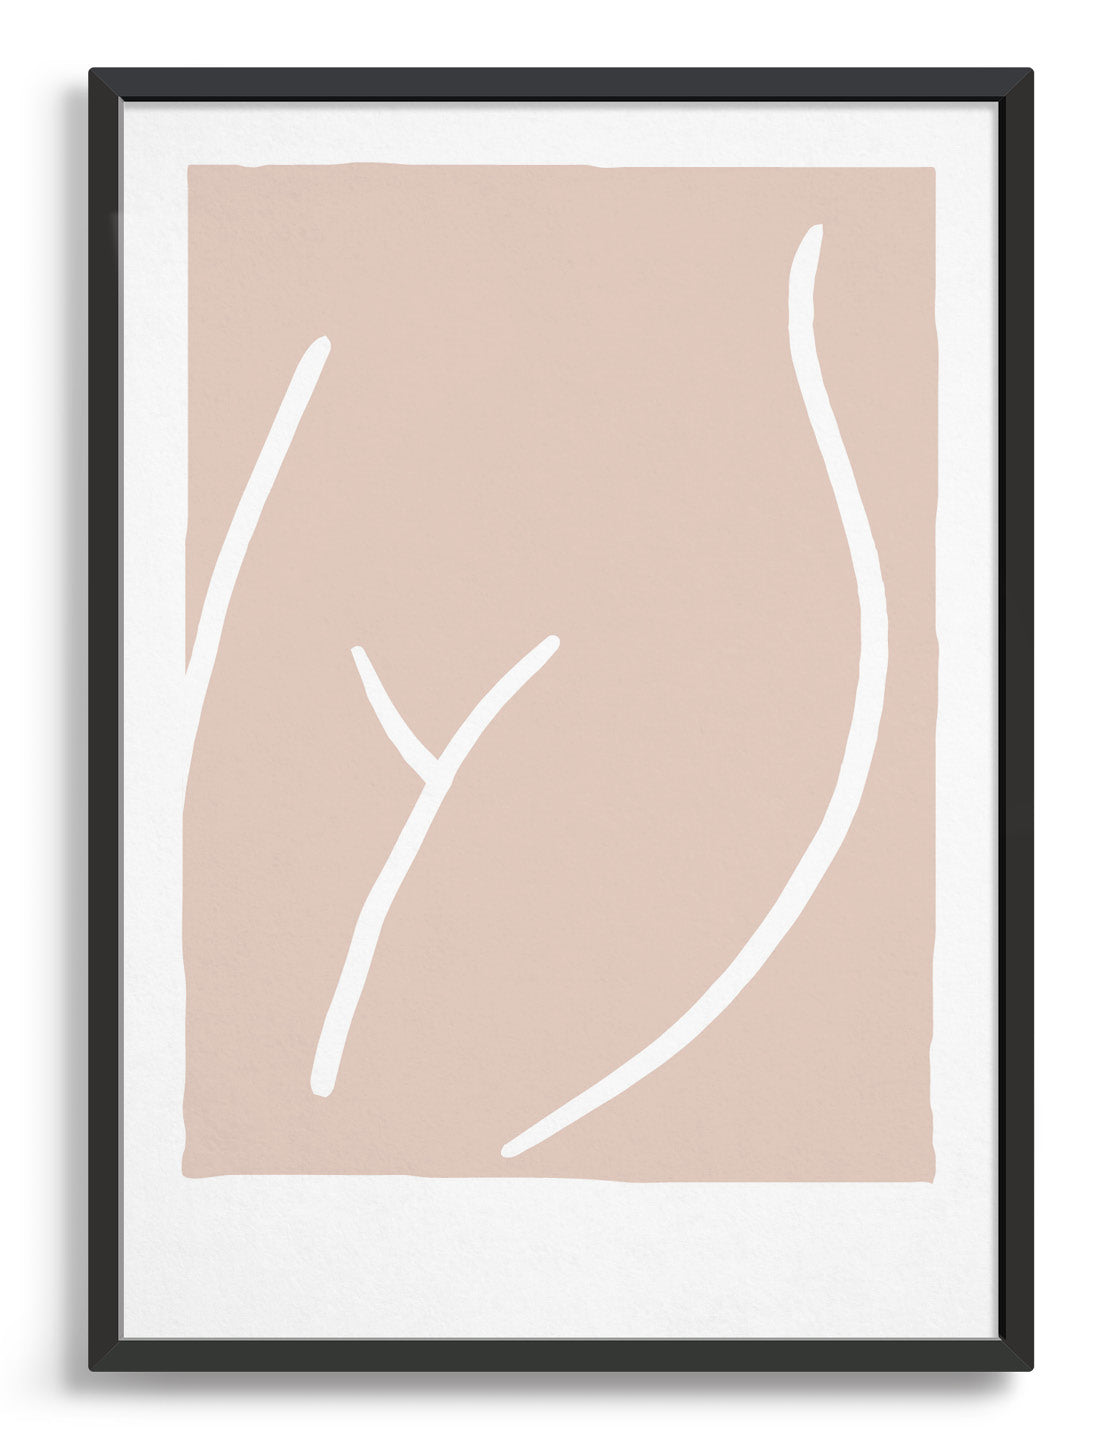 Line drawing in white of a woman's waist and upper legs against a pink background